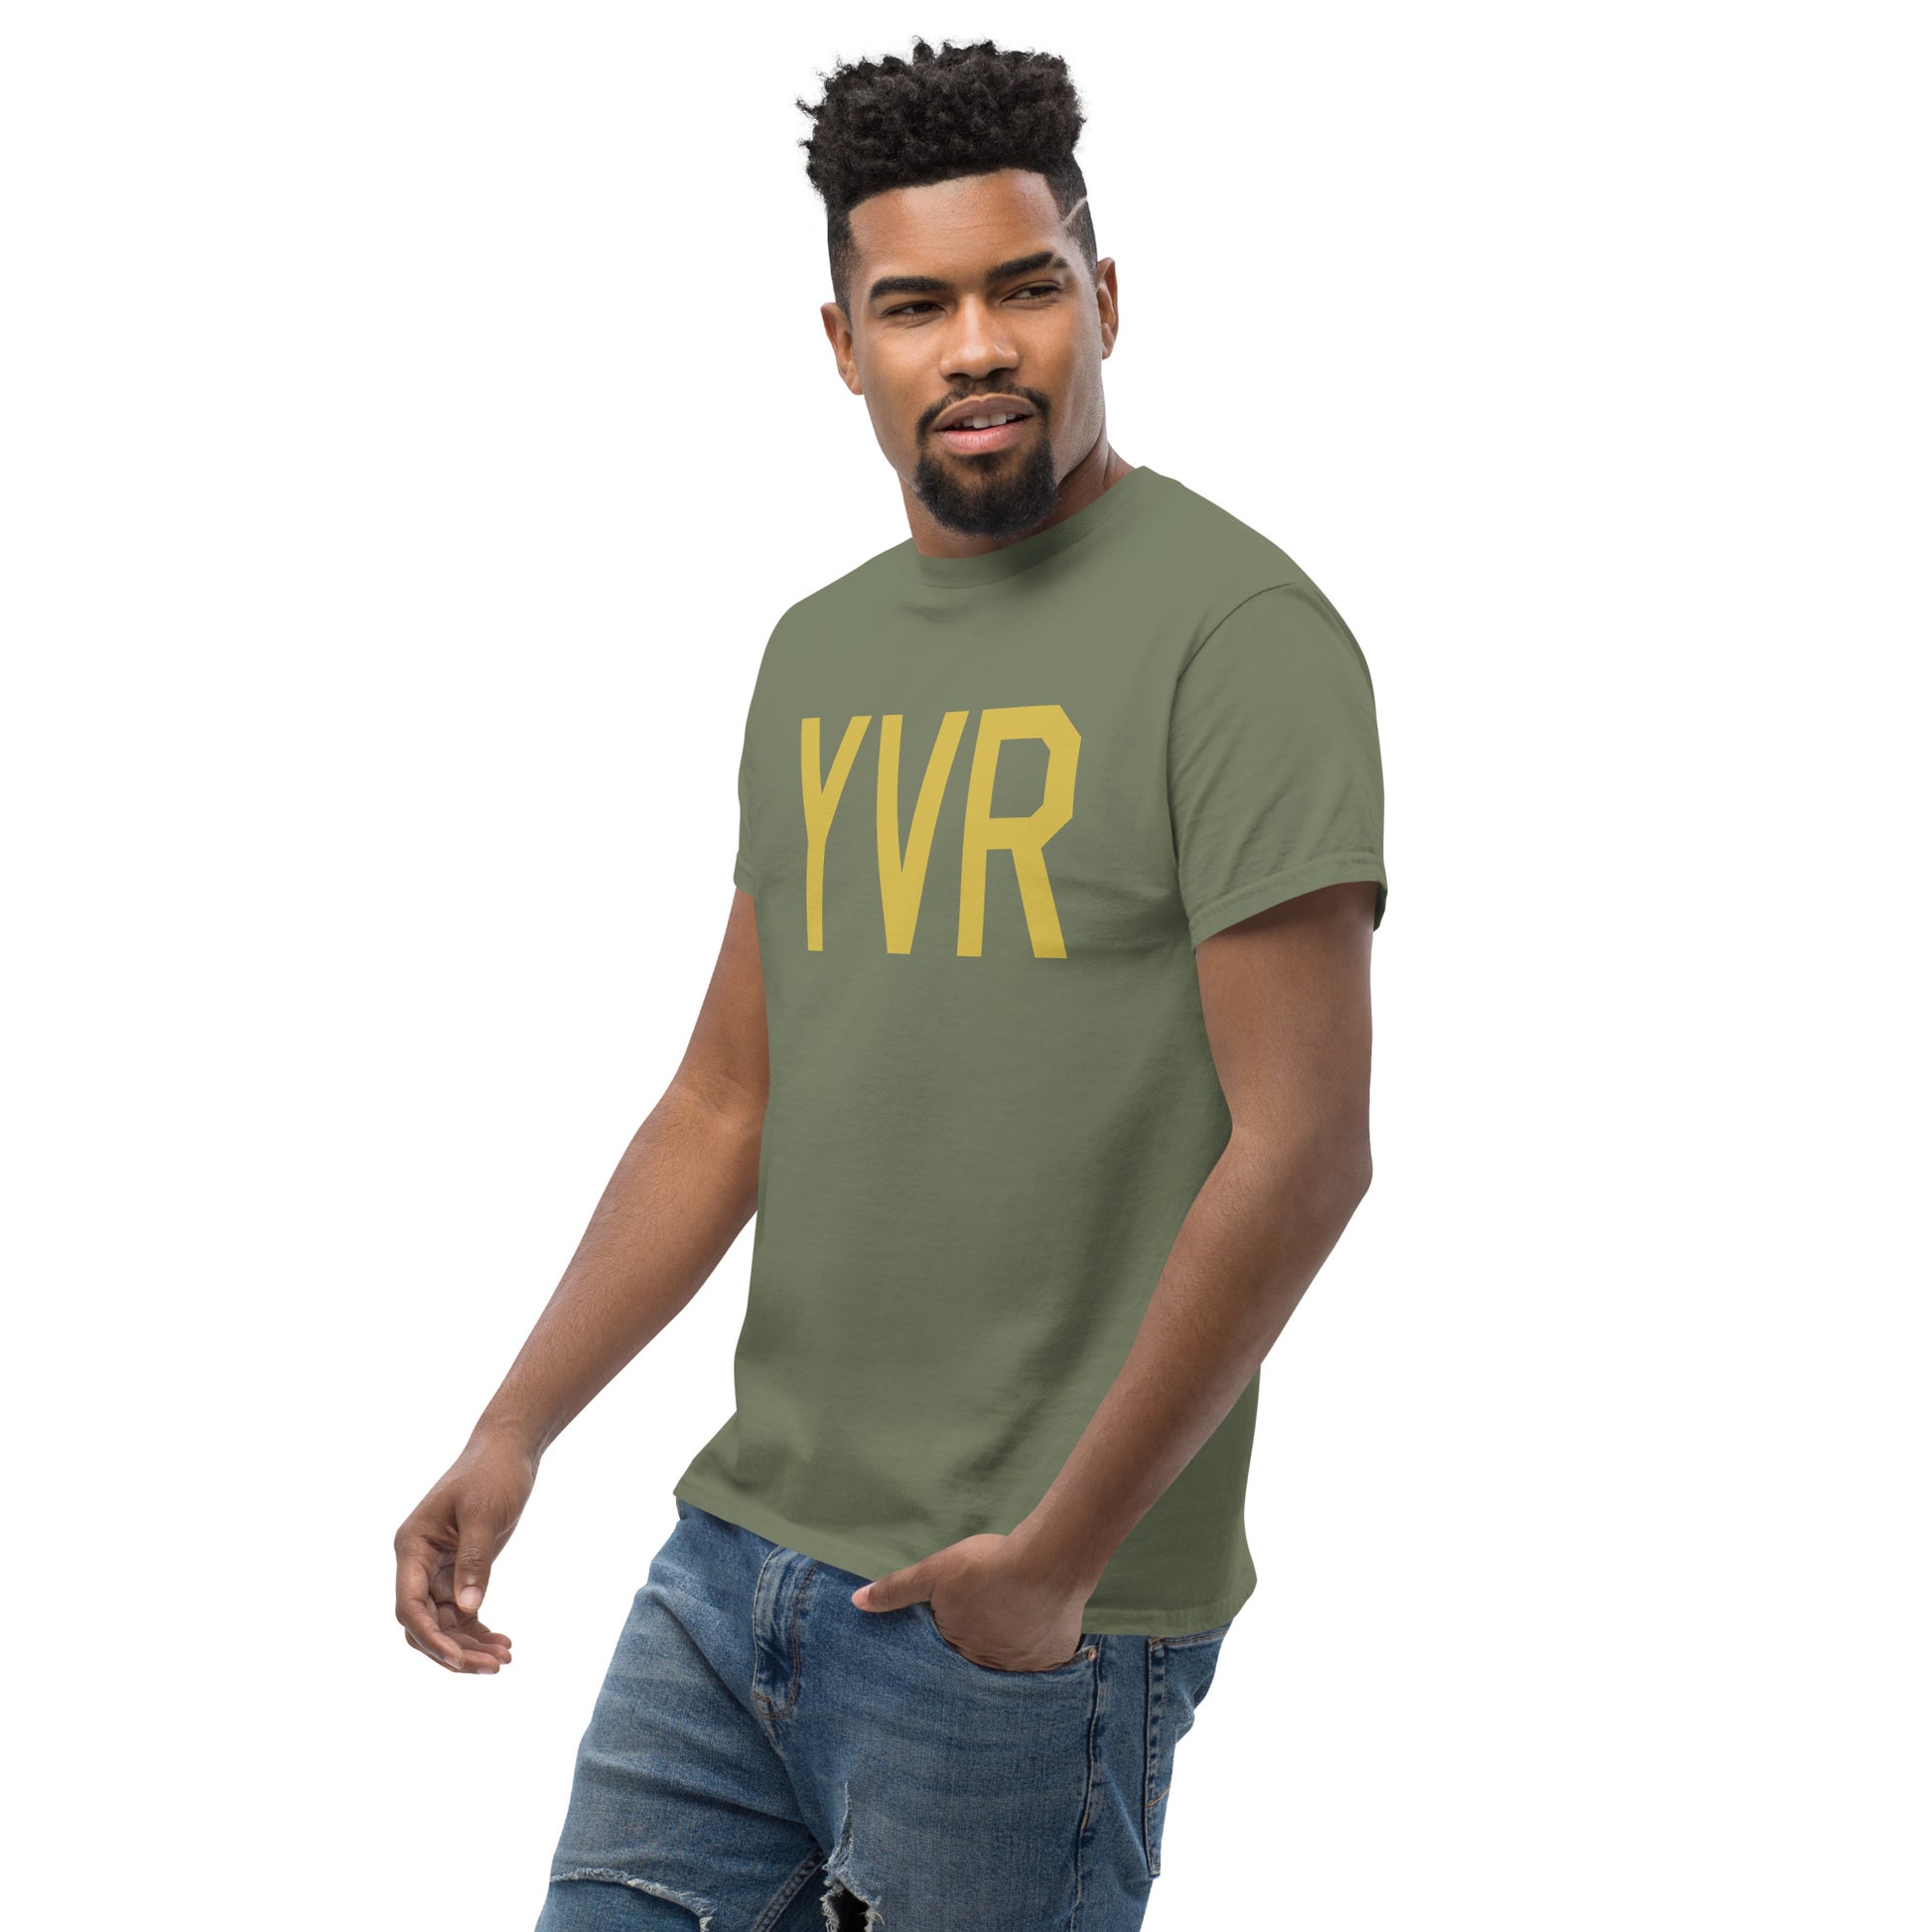 Aviation Enthusiast Men's Tee - Old Gold Graphic • YVR Vancouver • YHM Designs - Image 07